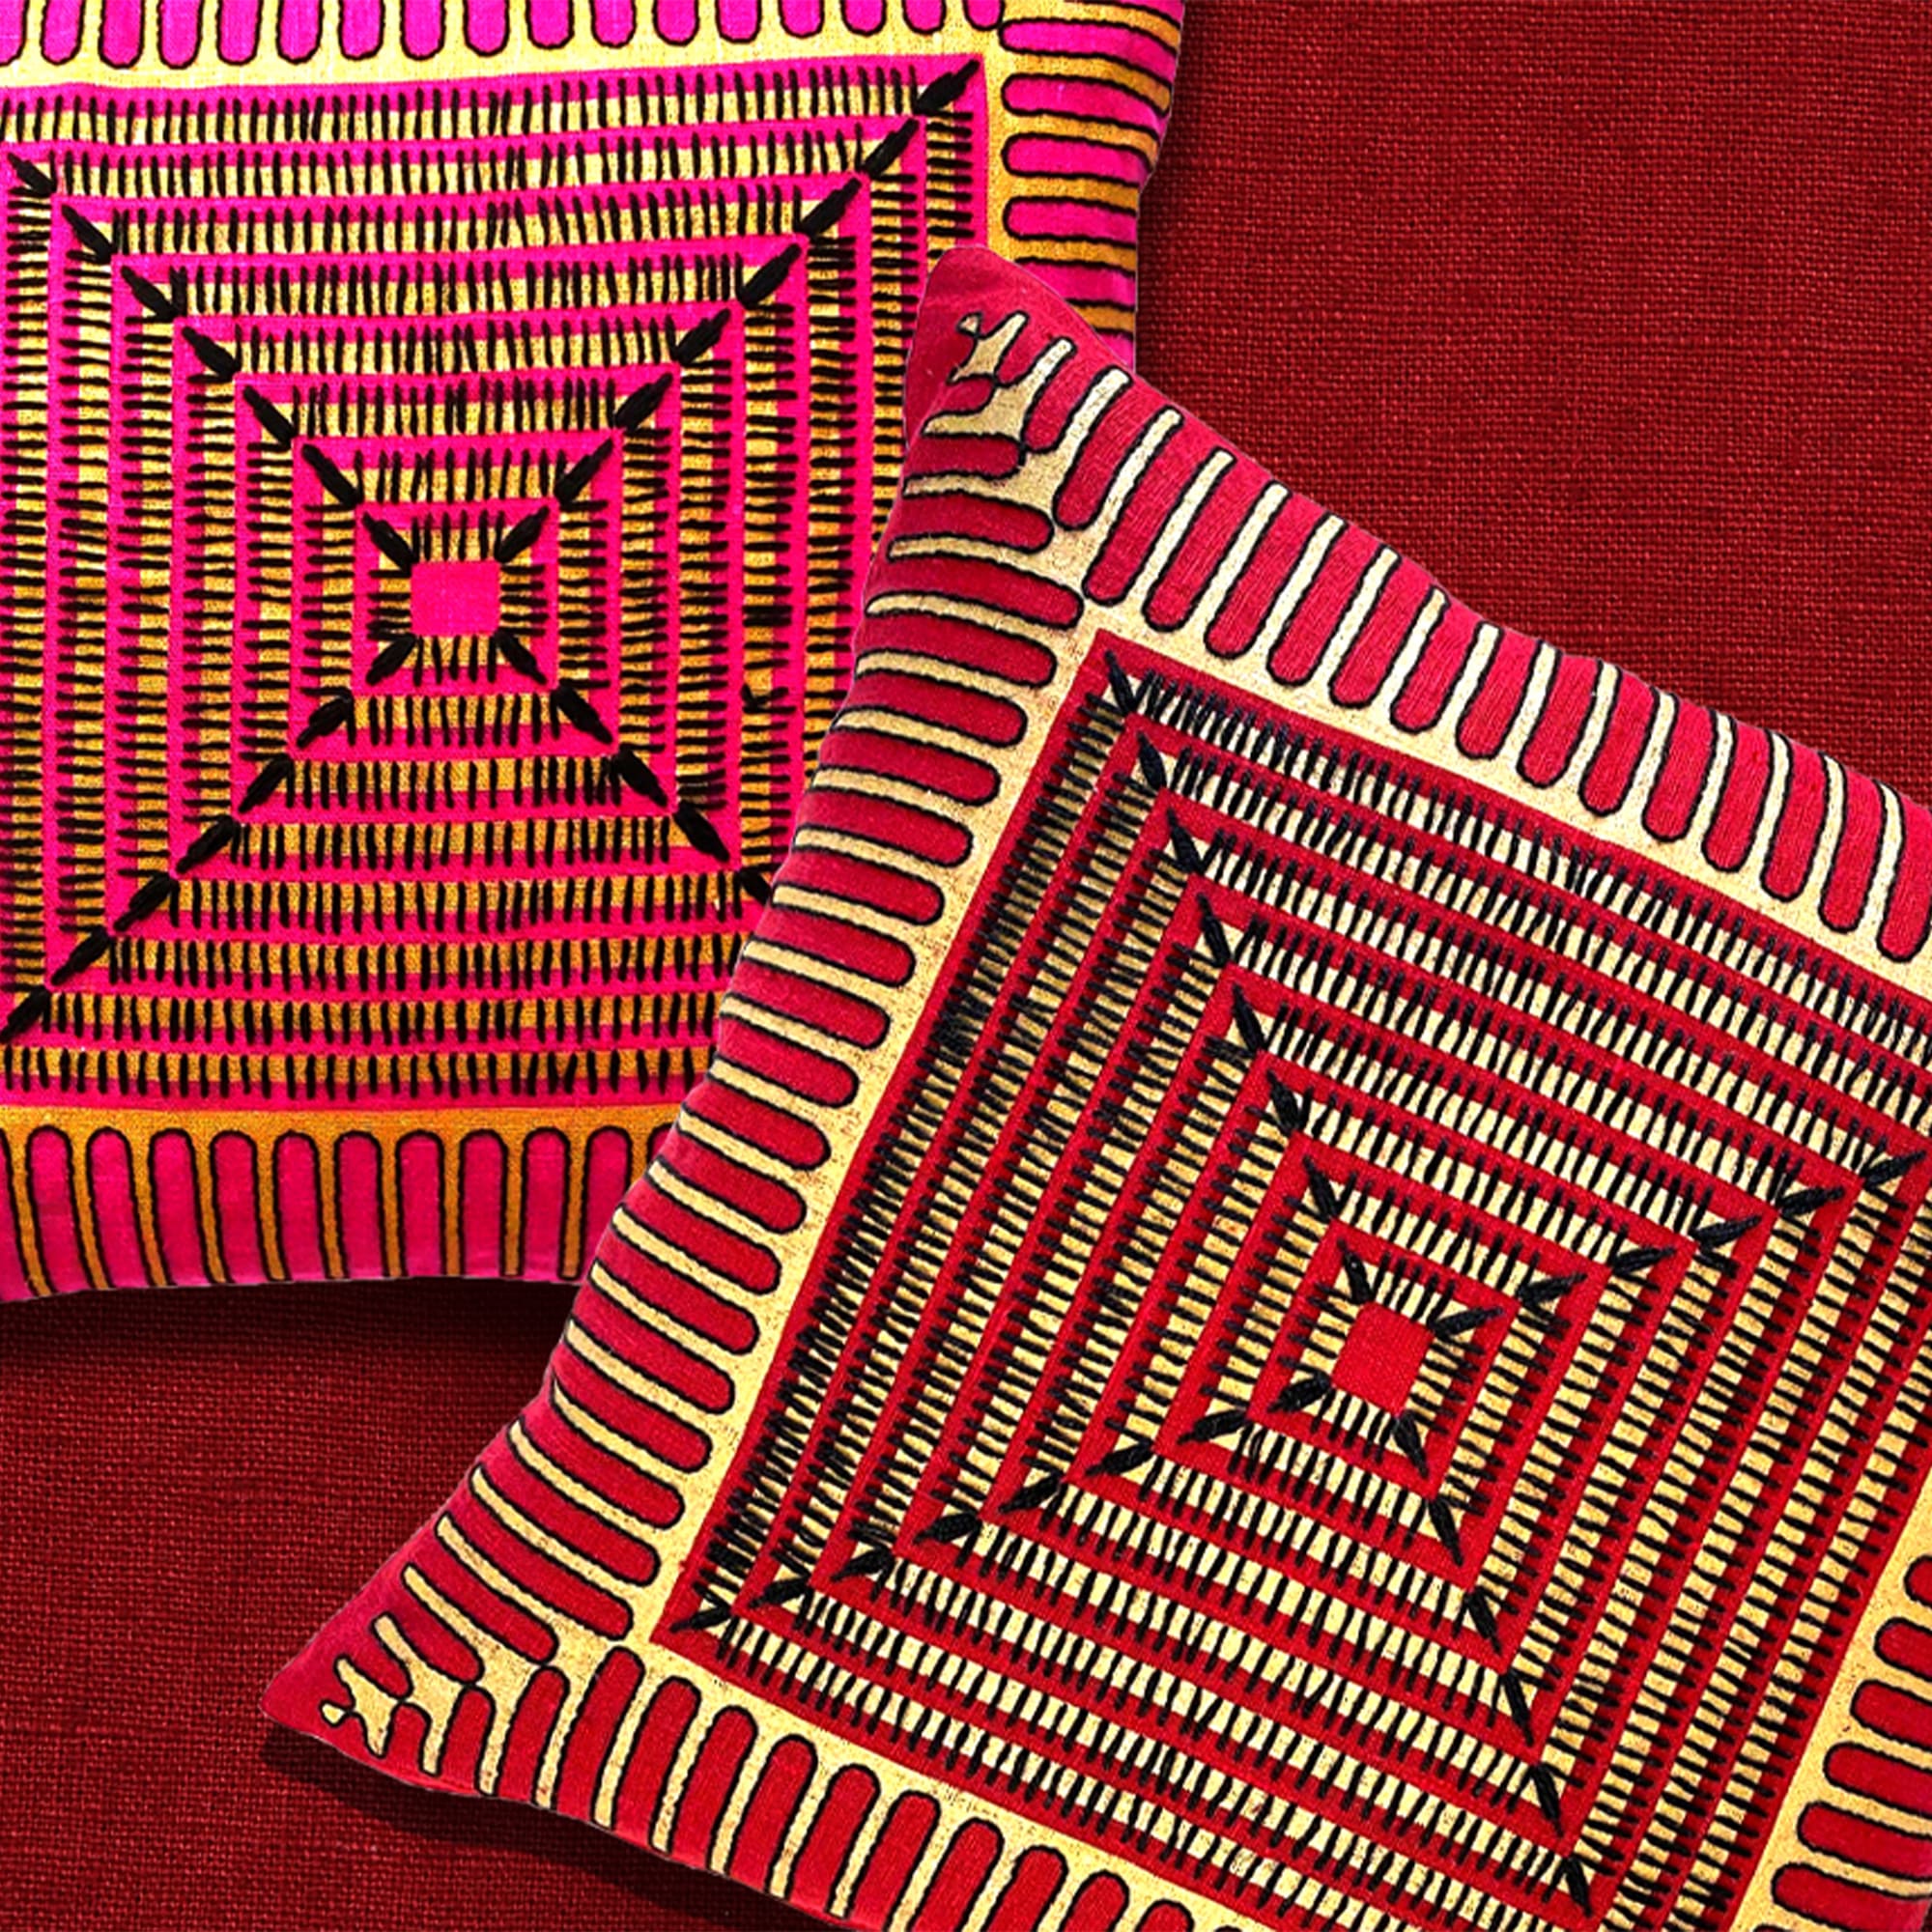 Cressida Bell Pyramid Embroidered Cushion Red